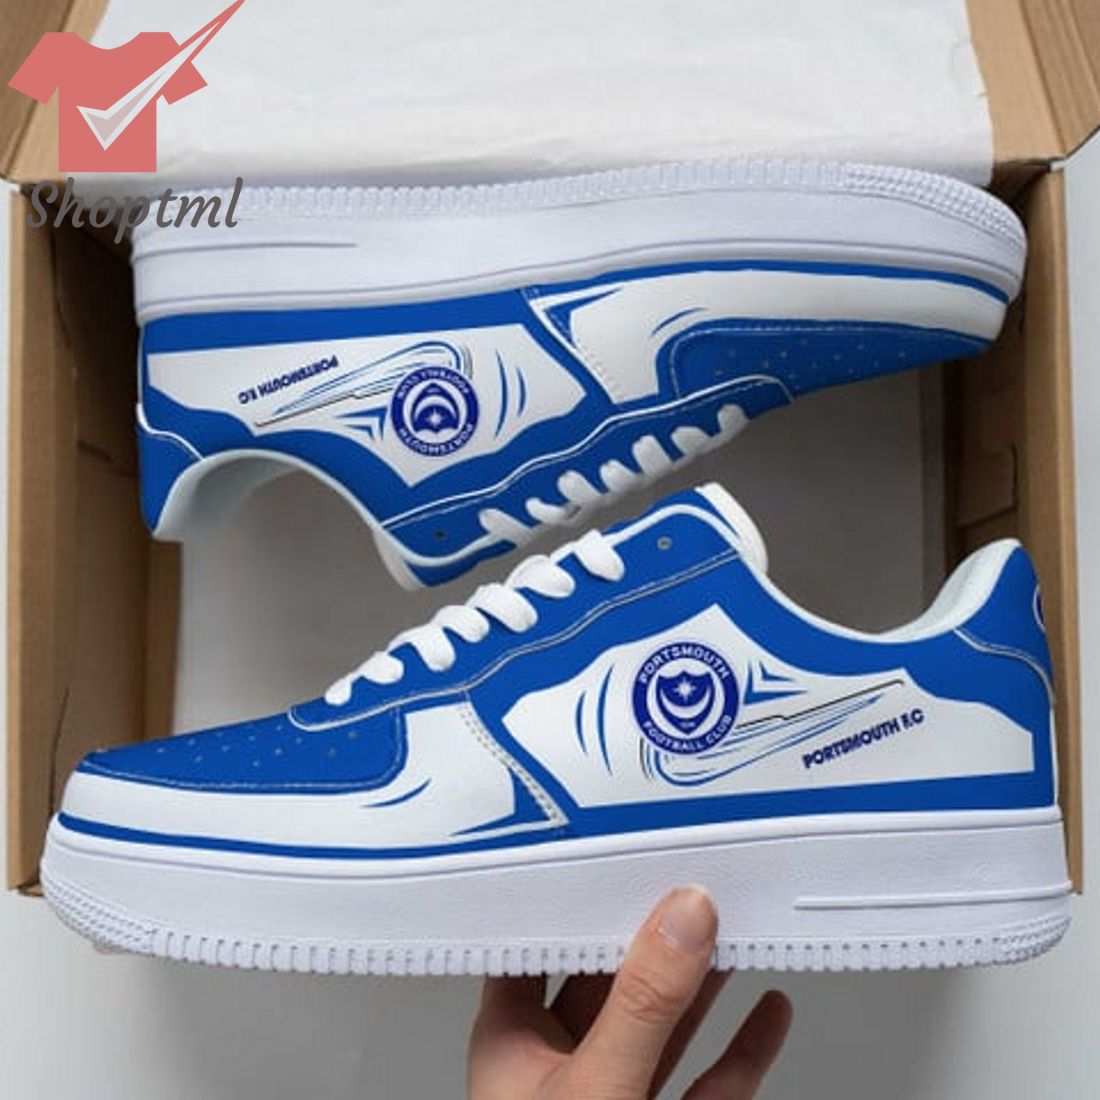 Portsmouth FC EFL Championship Nike Air Force 1 Sneakers